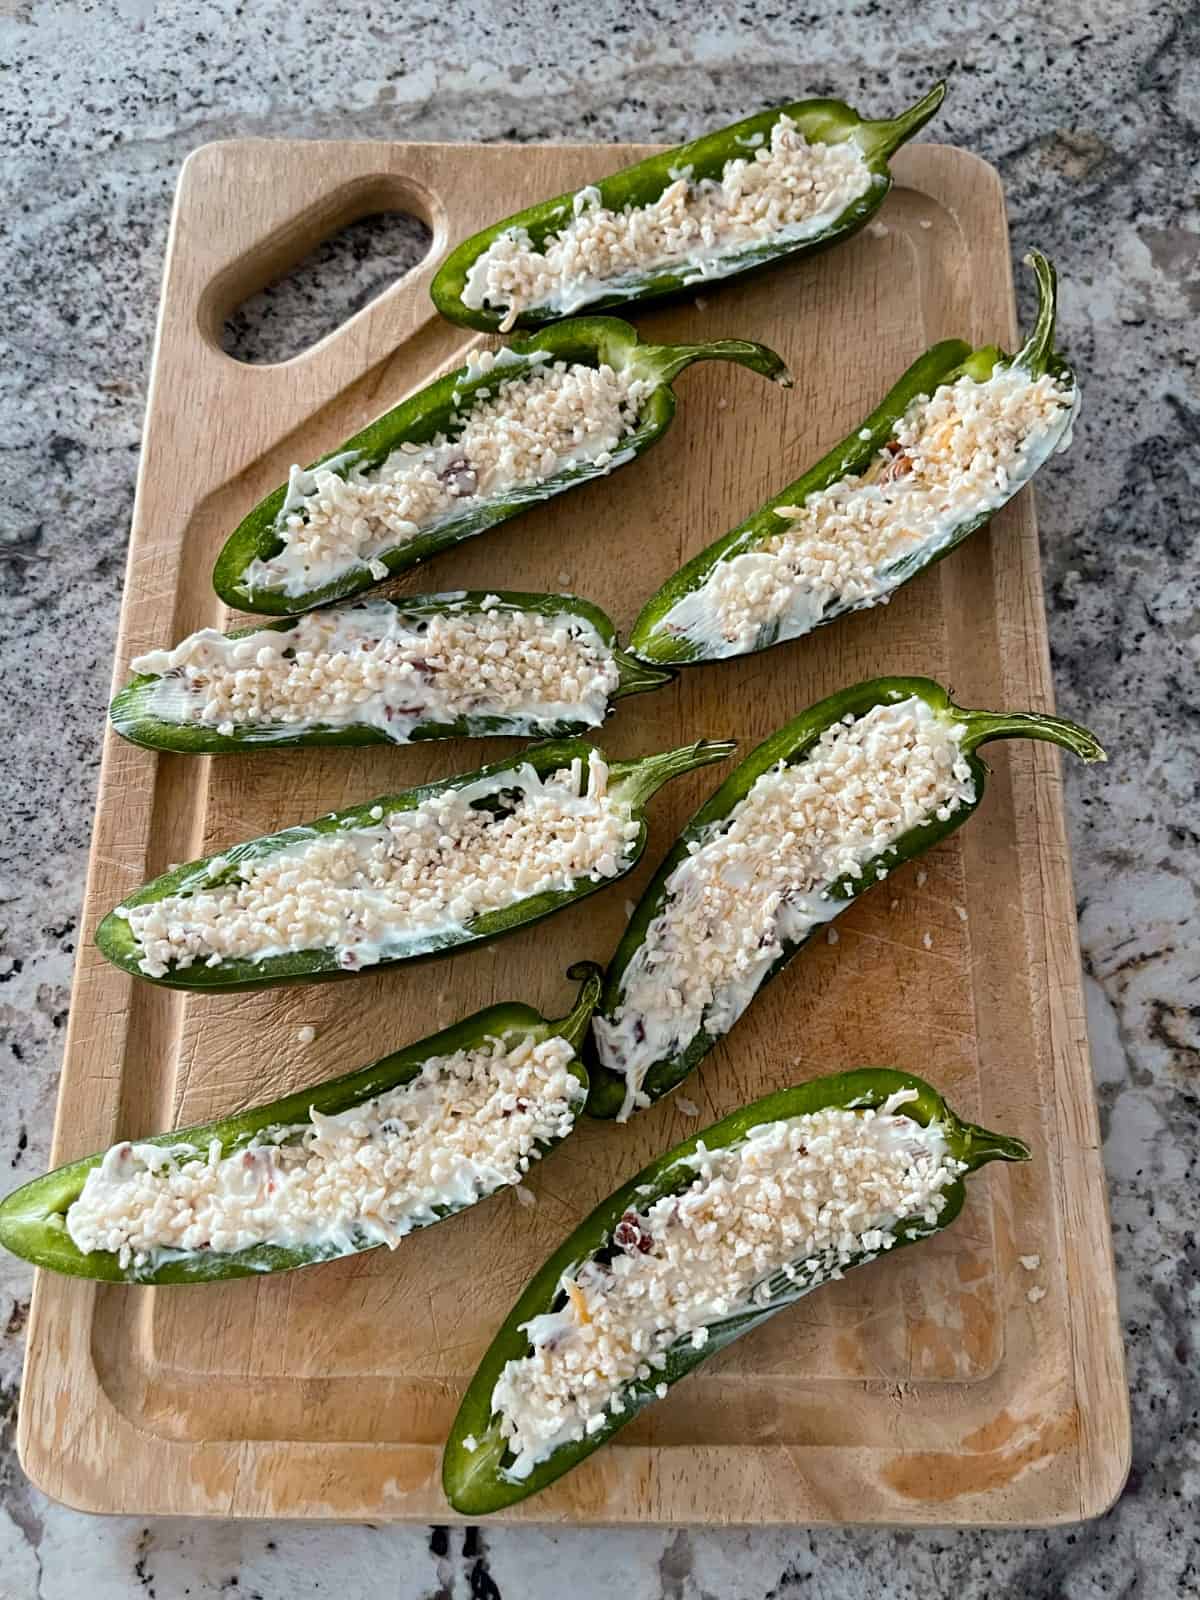 Uncooked jalapeno poppers - jalapeños cut in half and filled with a mixture of cream cheese, shredded cheese and bacon crumbles, then sprinkled with Panko breadcrumbs on wood cutting board.